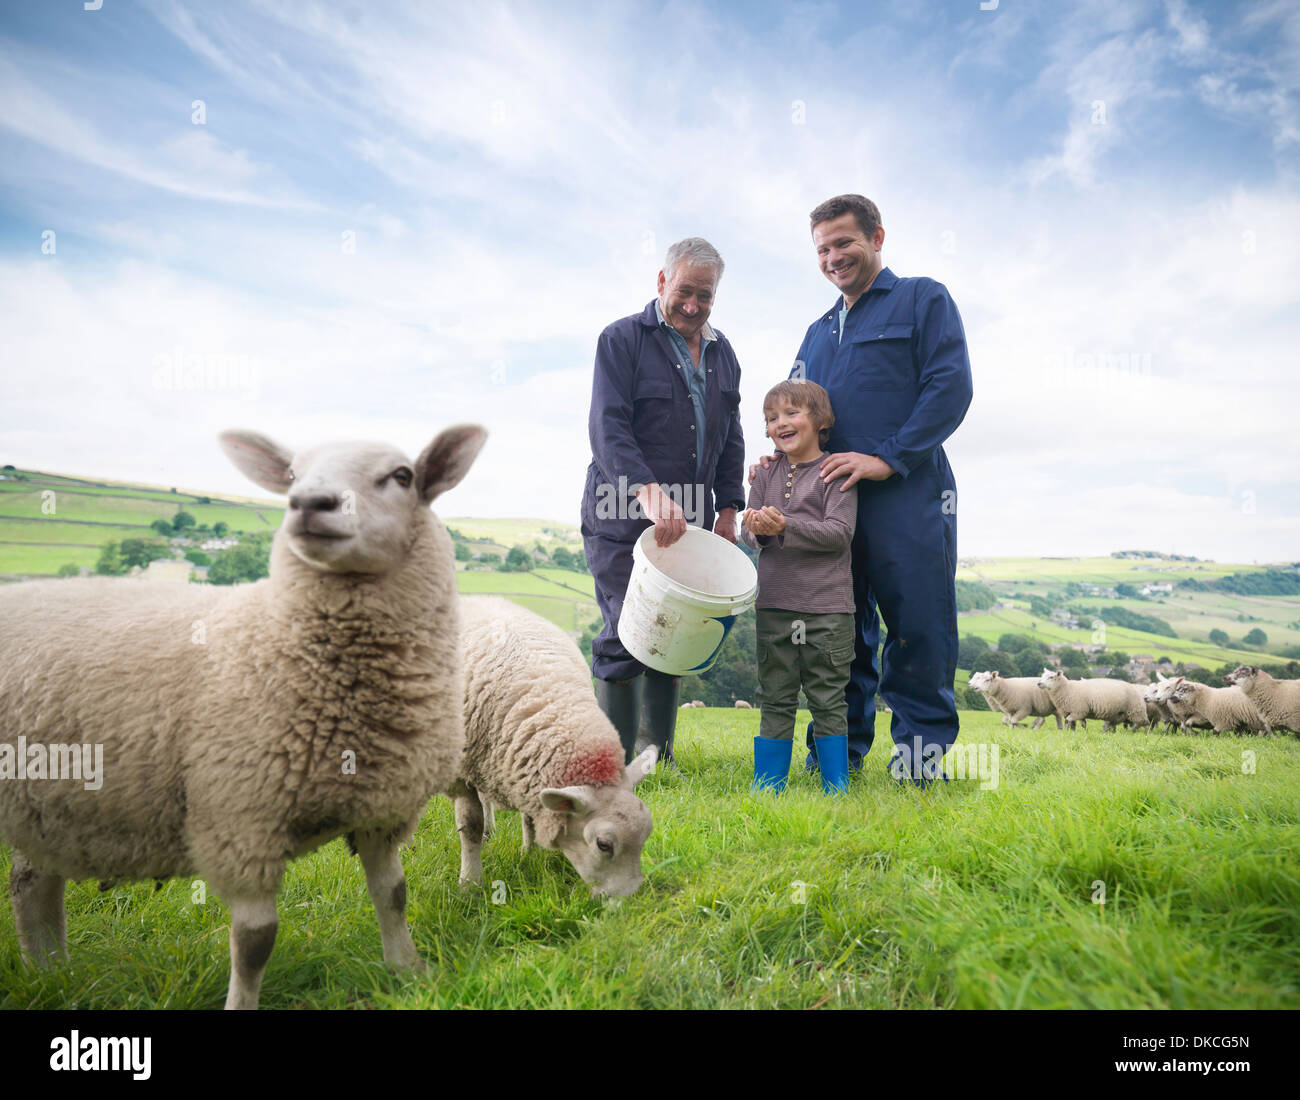 Mature farmer, adult son and grandson feeding sheep in field Stock Photo